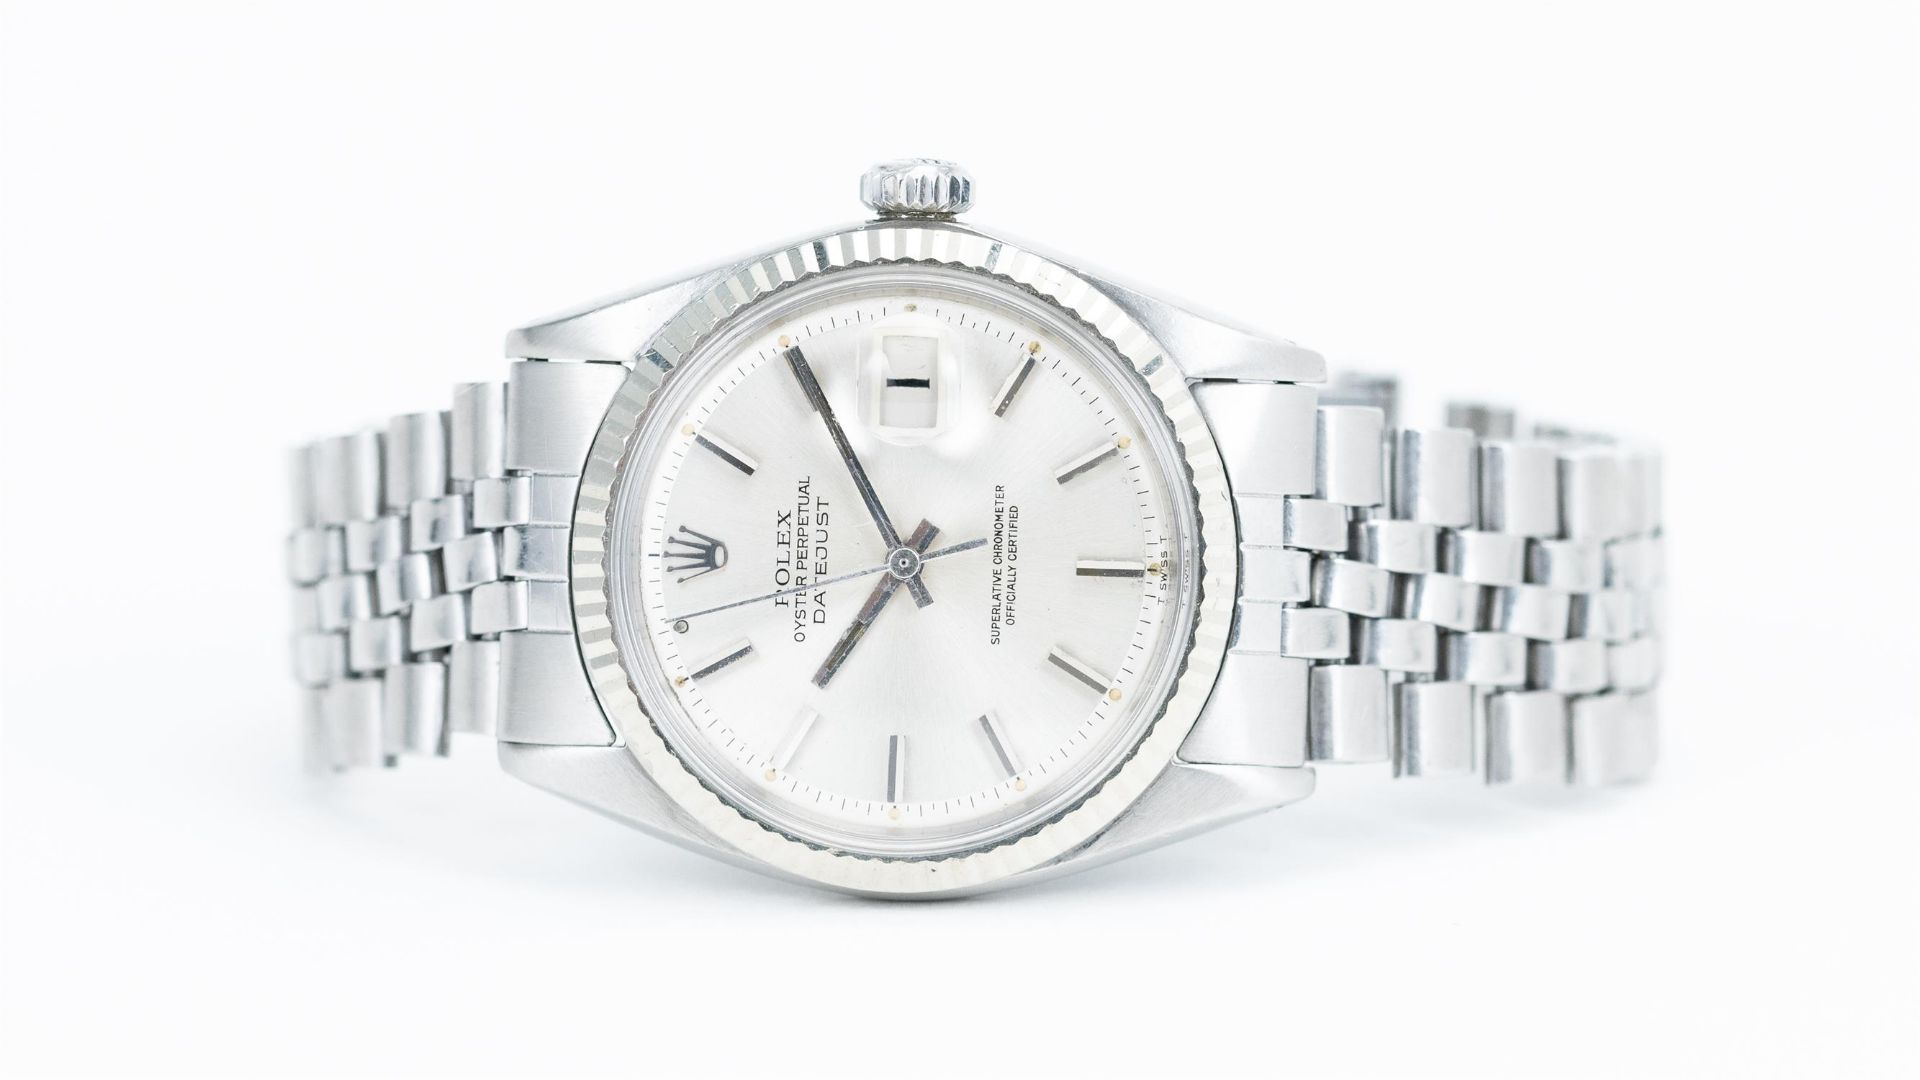 1967 Rolex Datejust Stainless Steel - Image 3 of 4